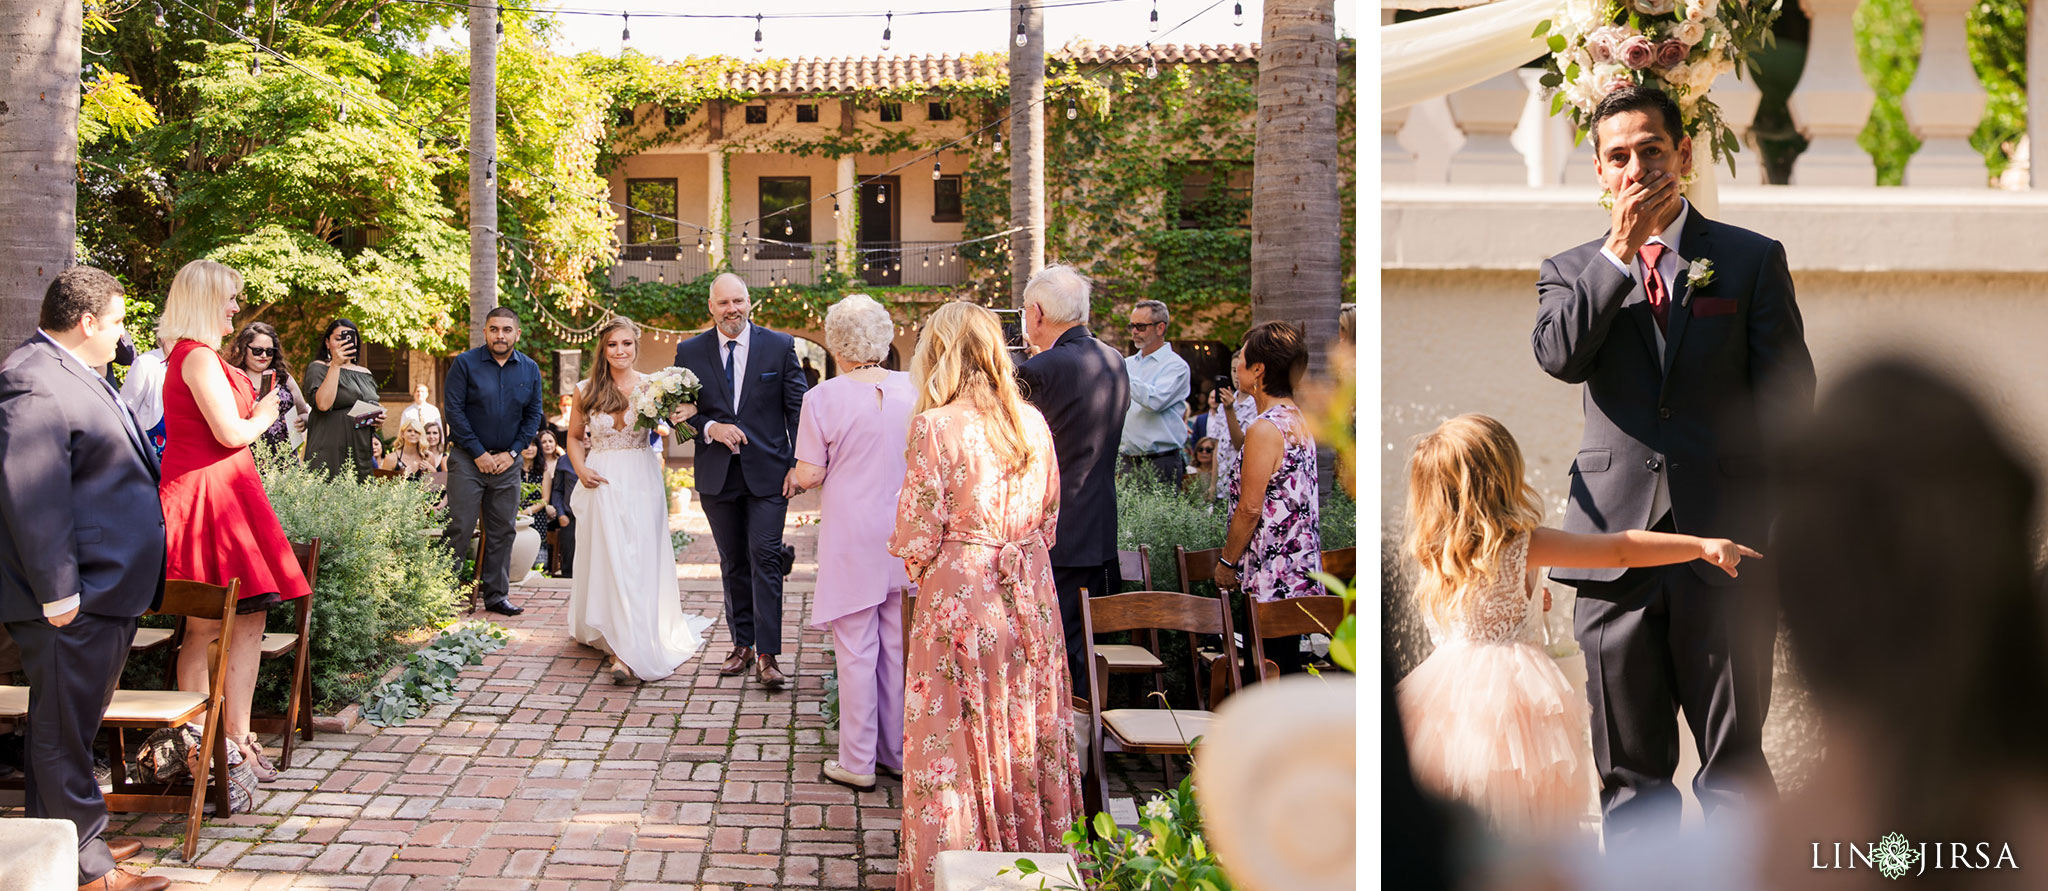 010 wattles mansion and gardens los angeles wedding ceremony photography